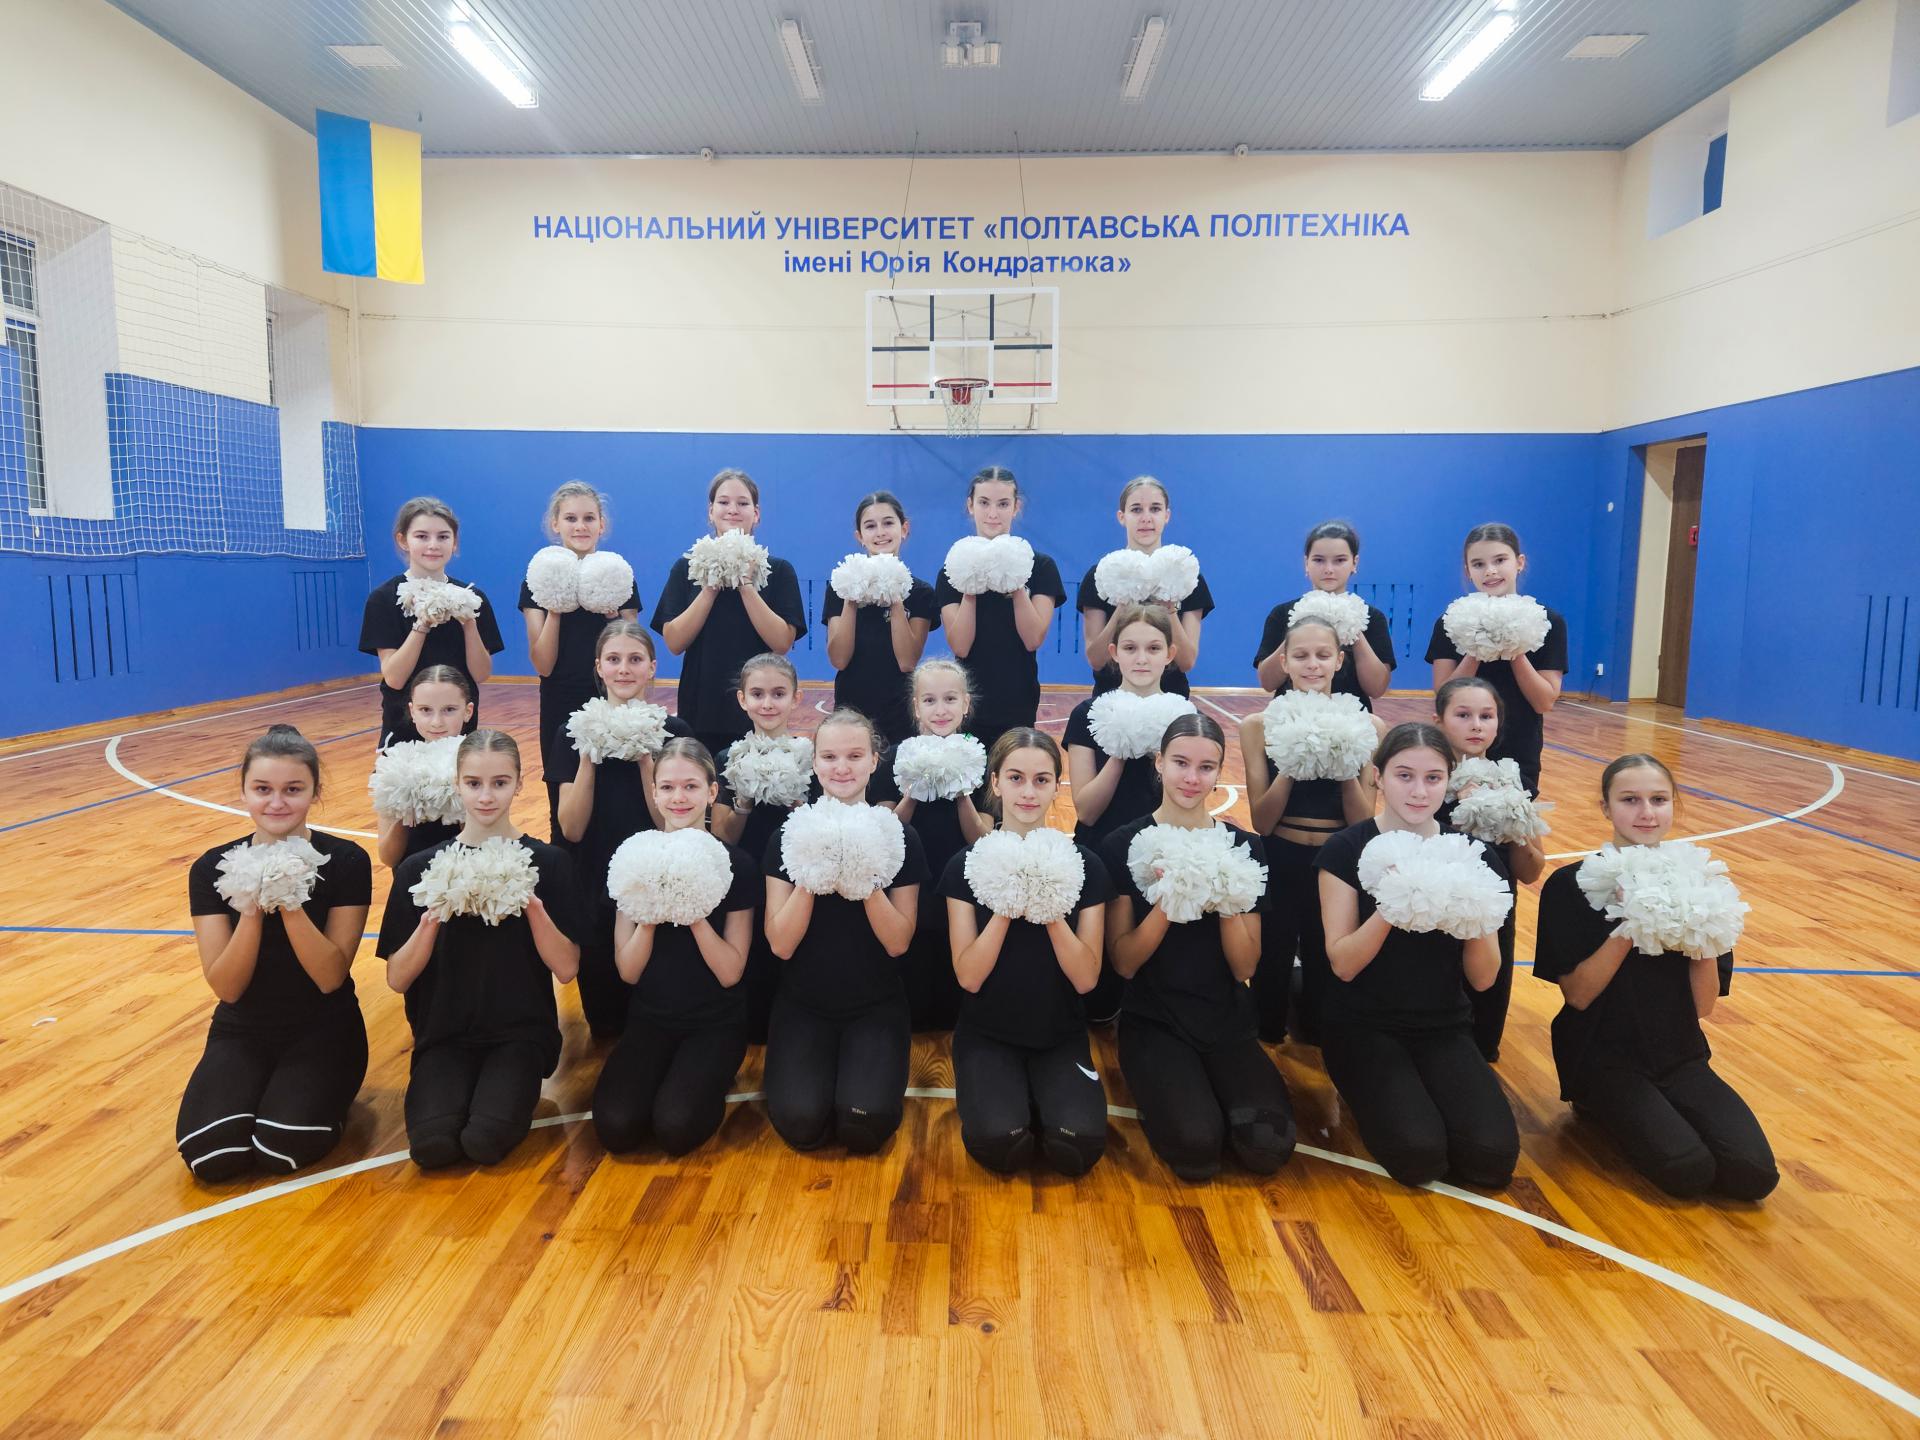 Polytechnic becomes a venue for a training meeting of the youth national cheerleading team of Ukraine 